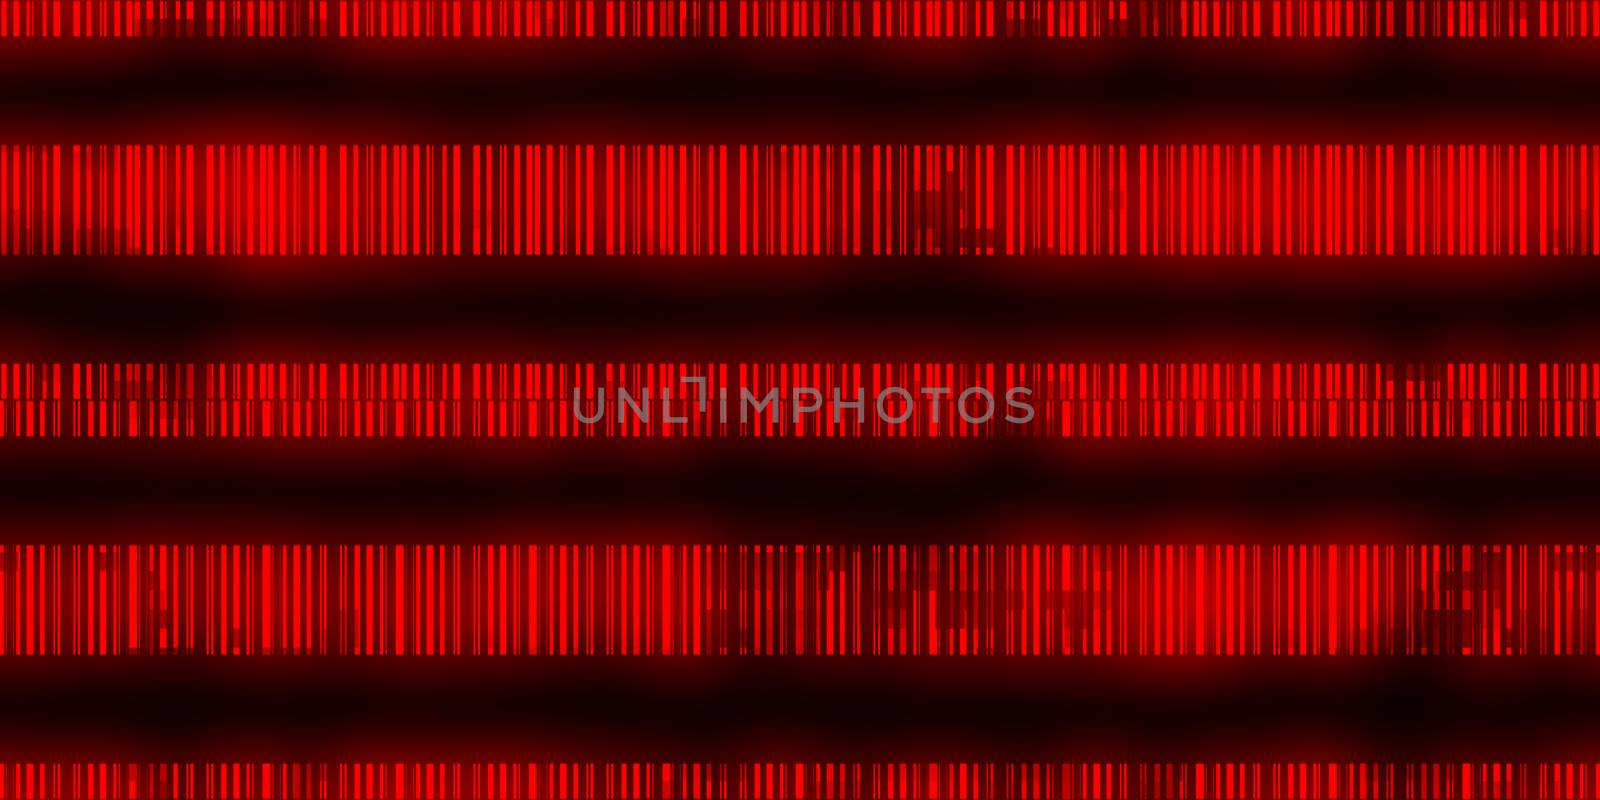 Red Dna Data Code Background. Seamless Science Dna Data Code Output Sequence. Human Individuality Code Backdrops. by sanches812